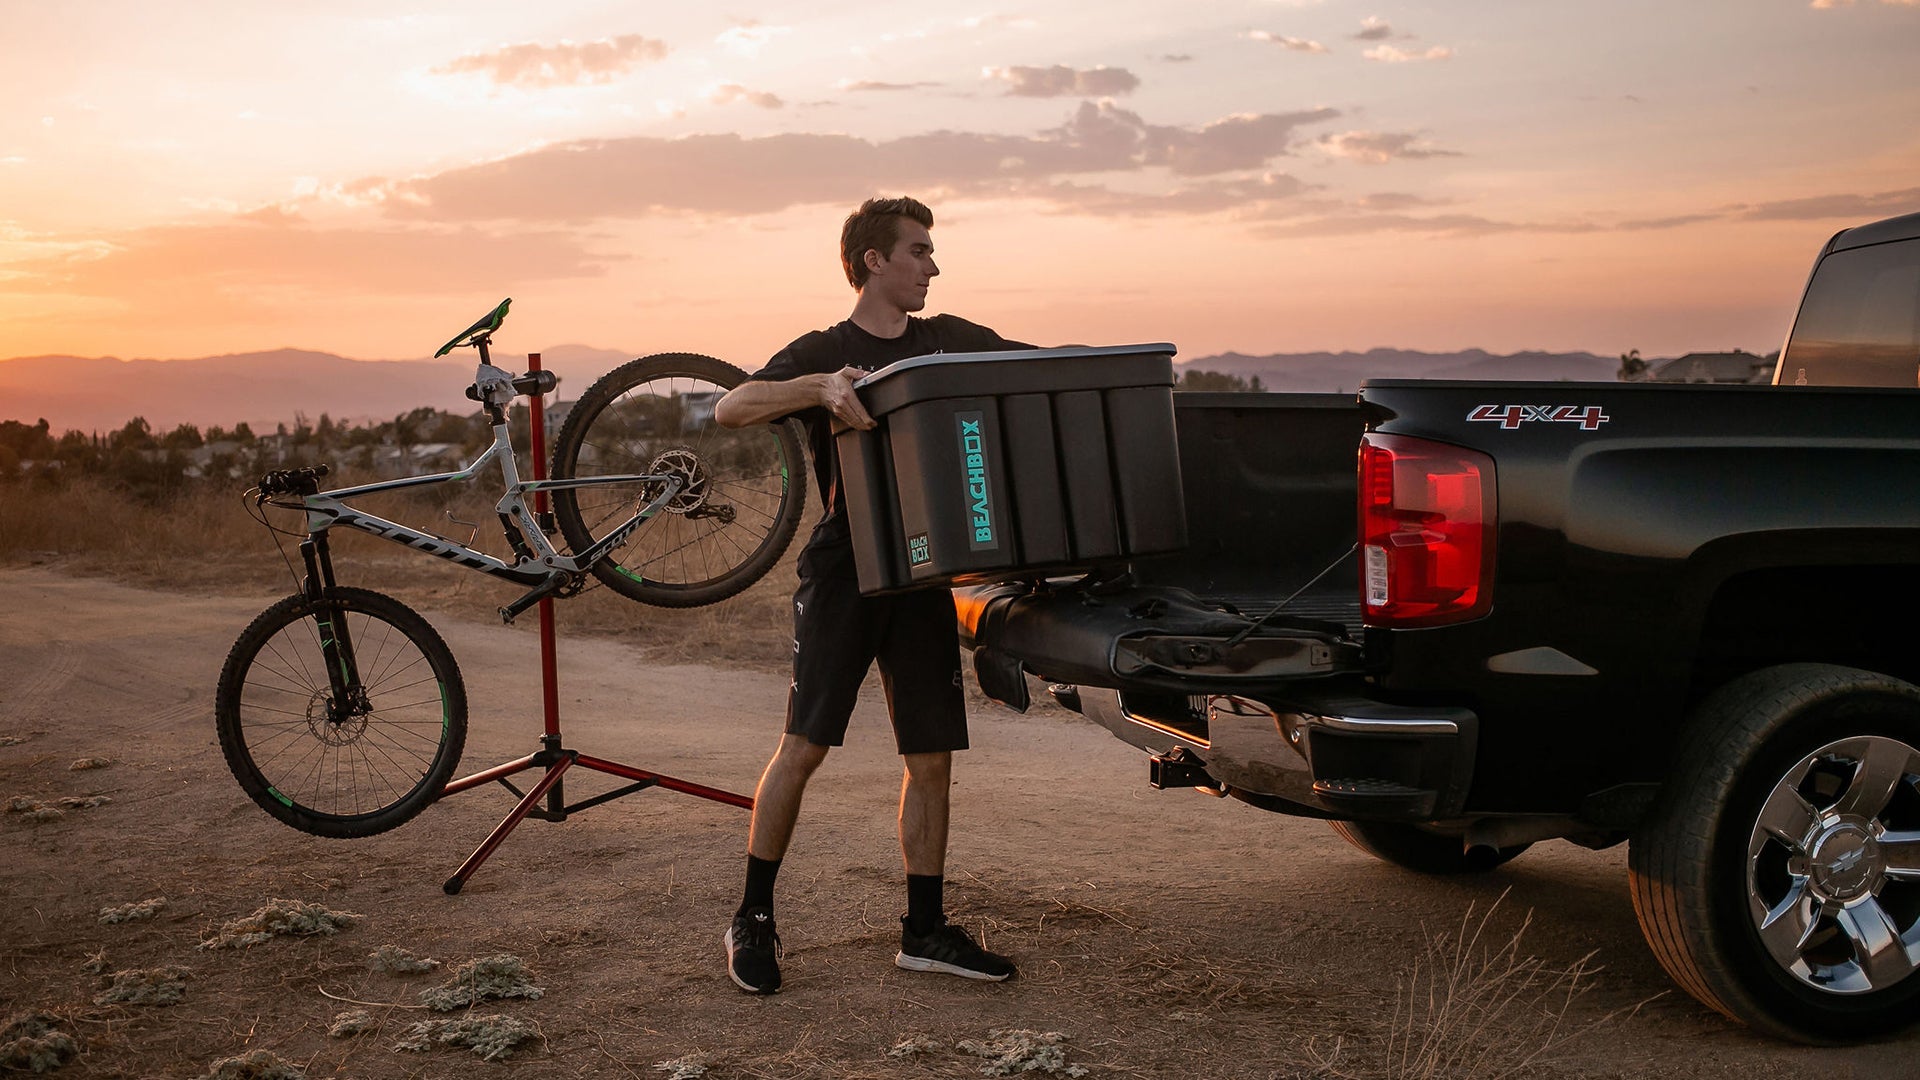 Ready to grab and go, the portable shower tank designed for outdoor adventures. The ultimate portable shower and storage box for mountain bikers and hikers and those who like to hit the trails. Storage for all your gear.